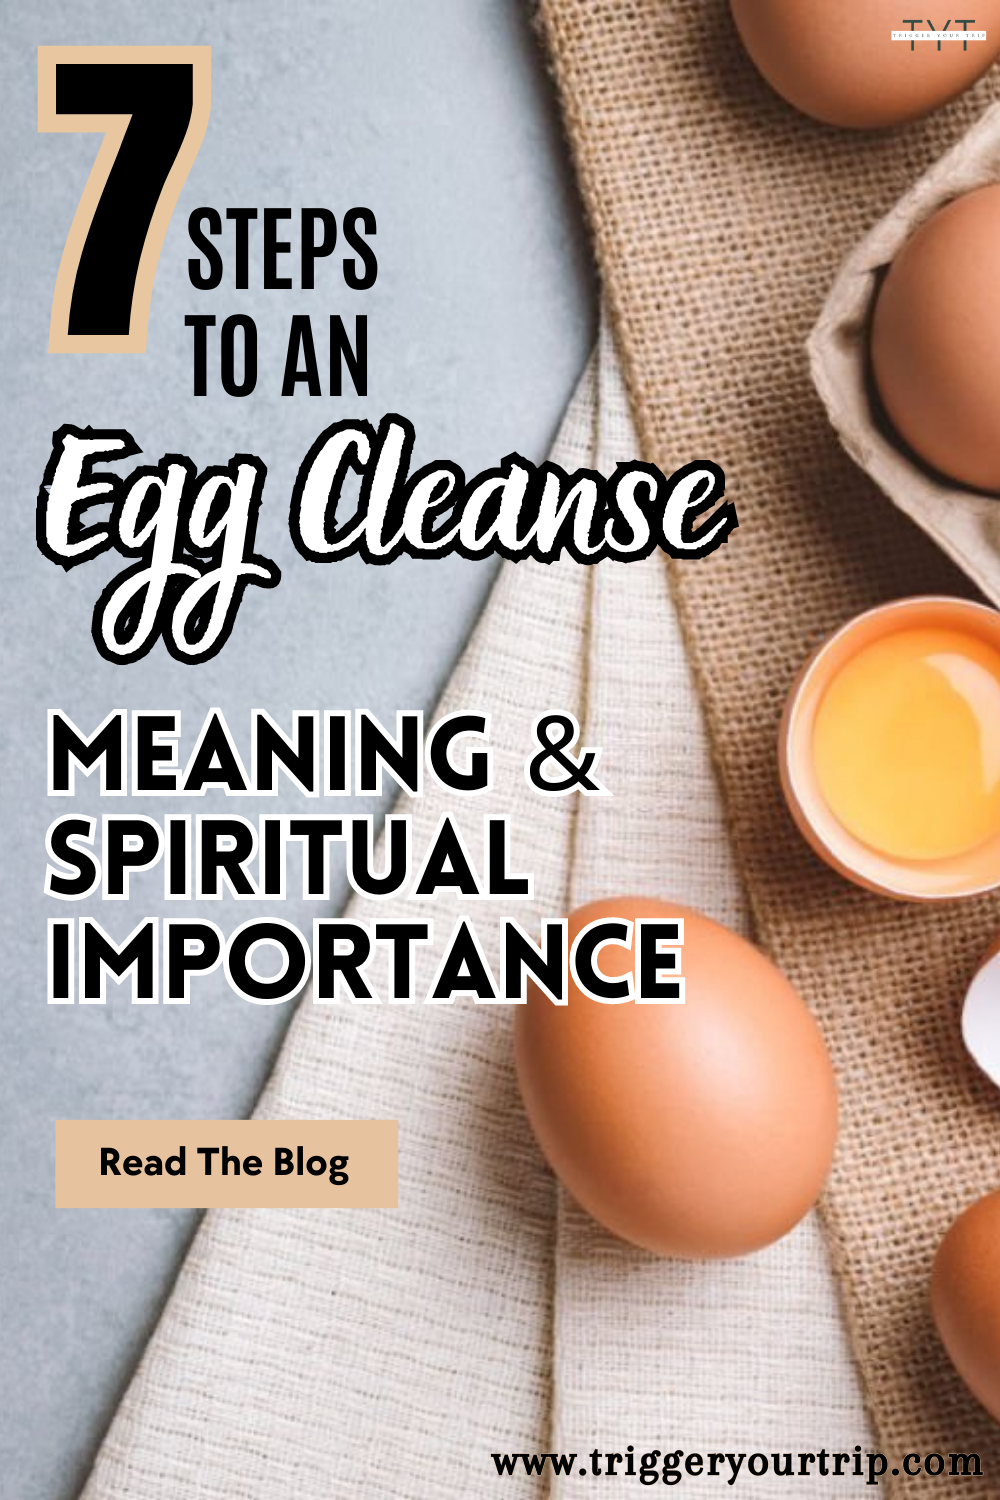 egg cleanse ritual: is it your first egg cleanse? 